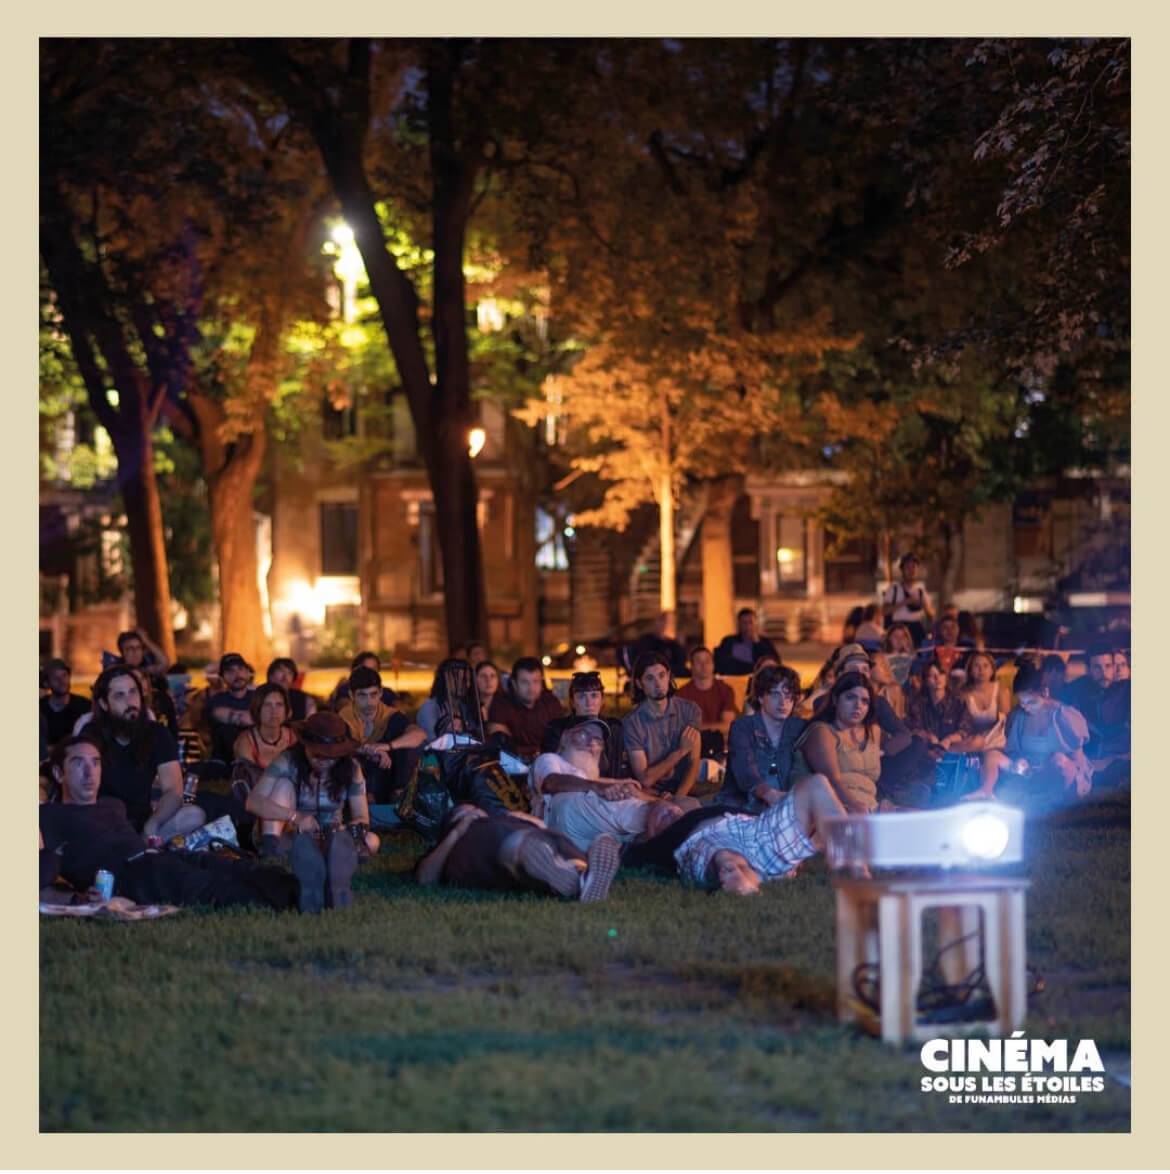 An attentive audience enjoys a film in a park at dusk, exemplifying community and leisure.